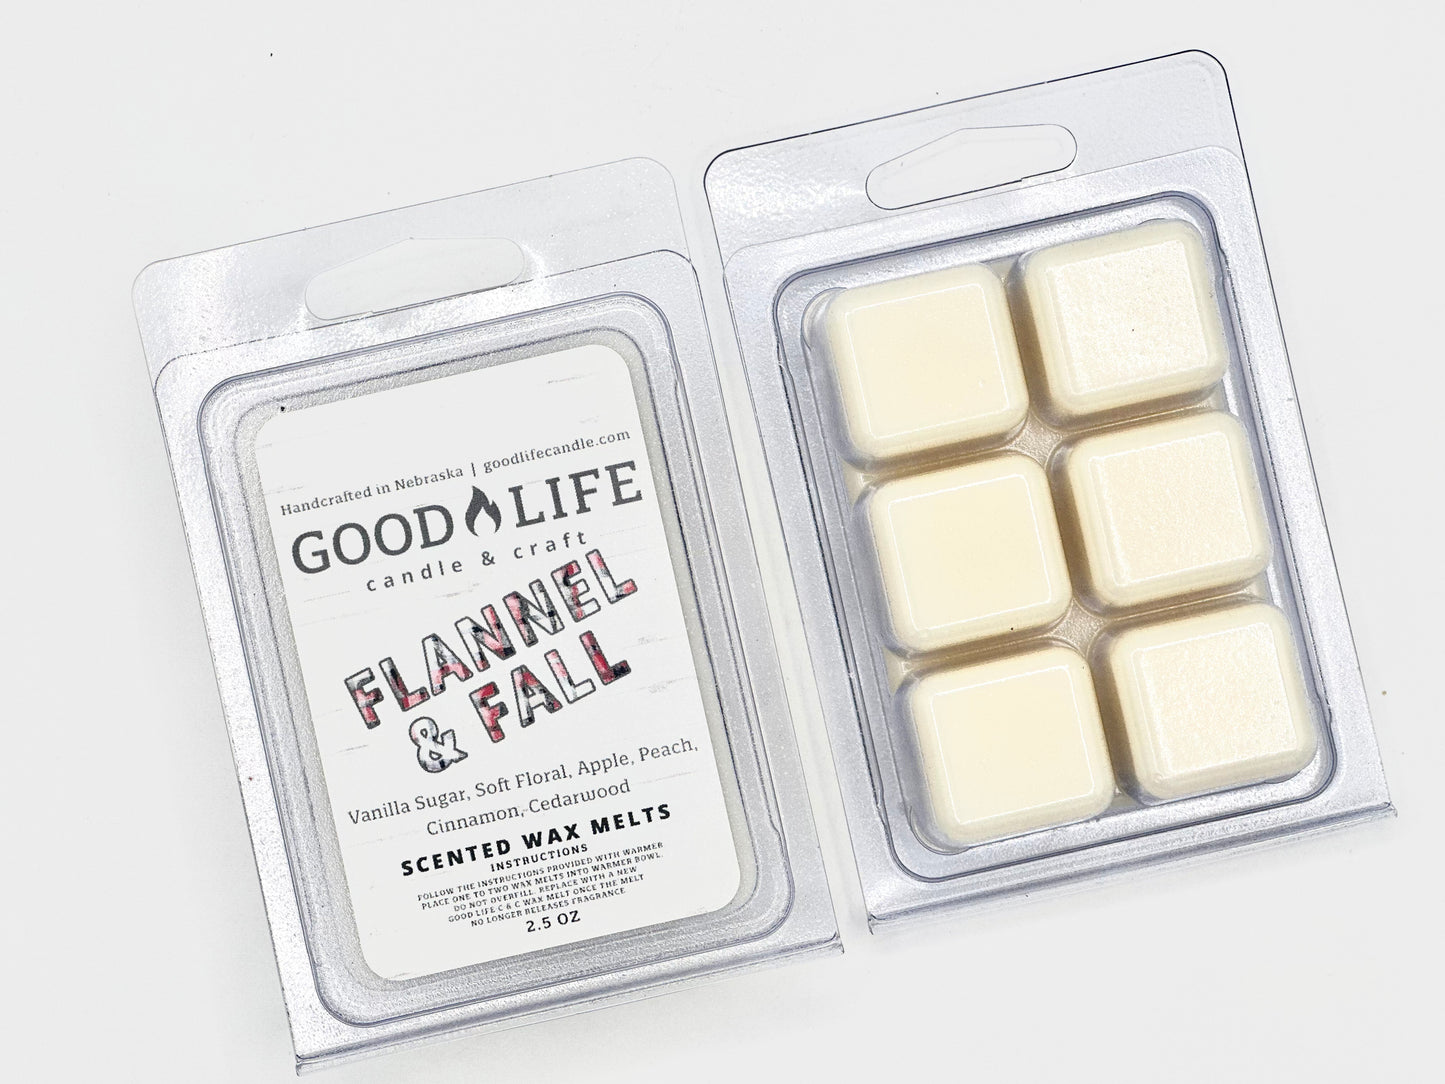 Flannel & Fall Scented Wax Melts